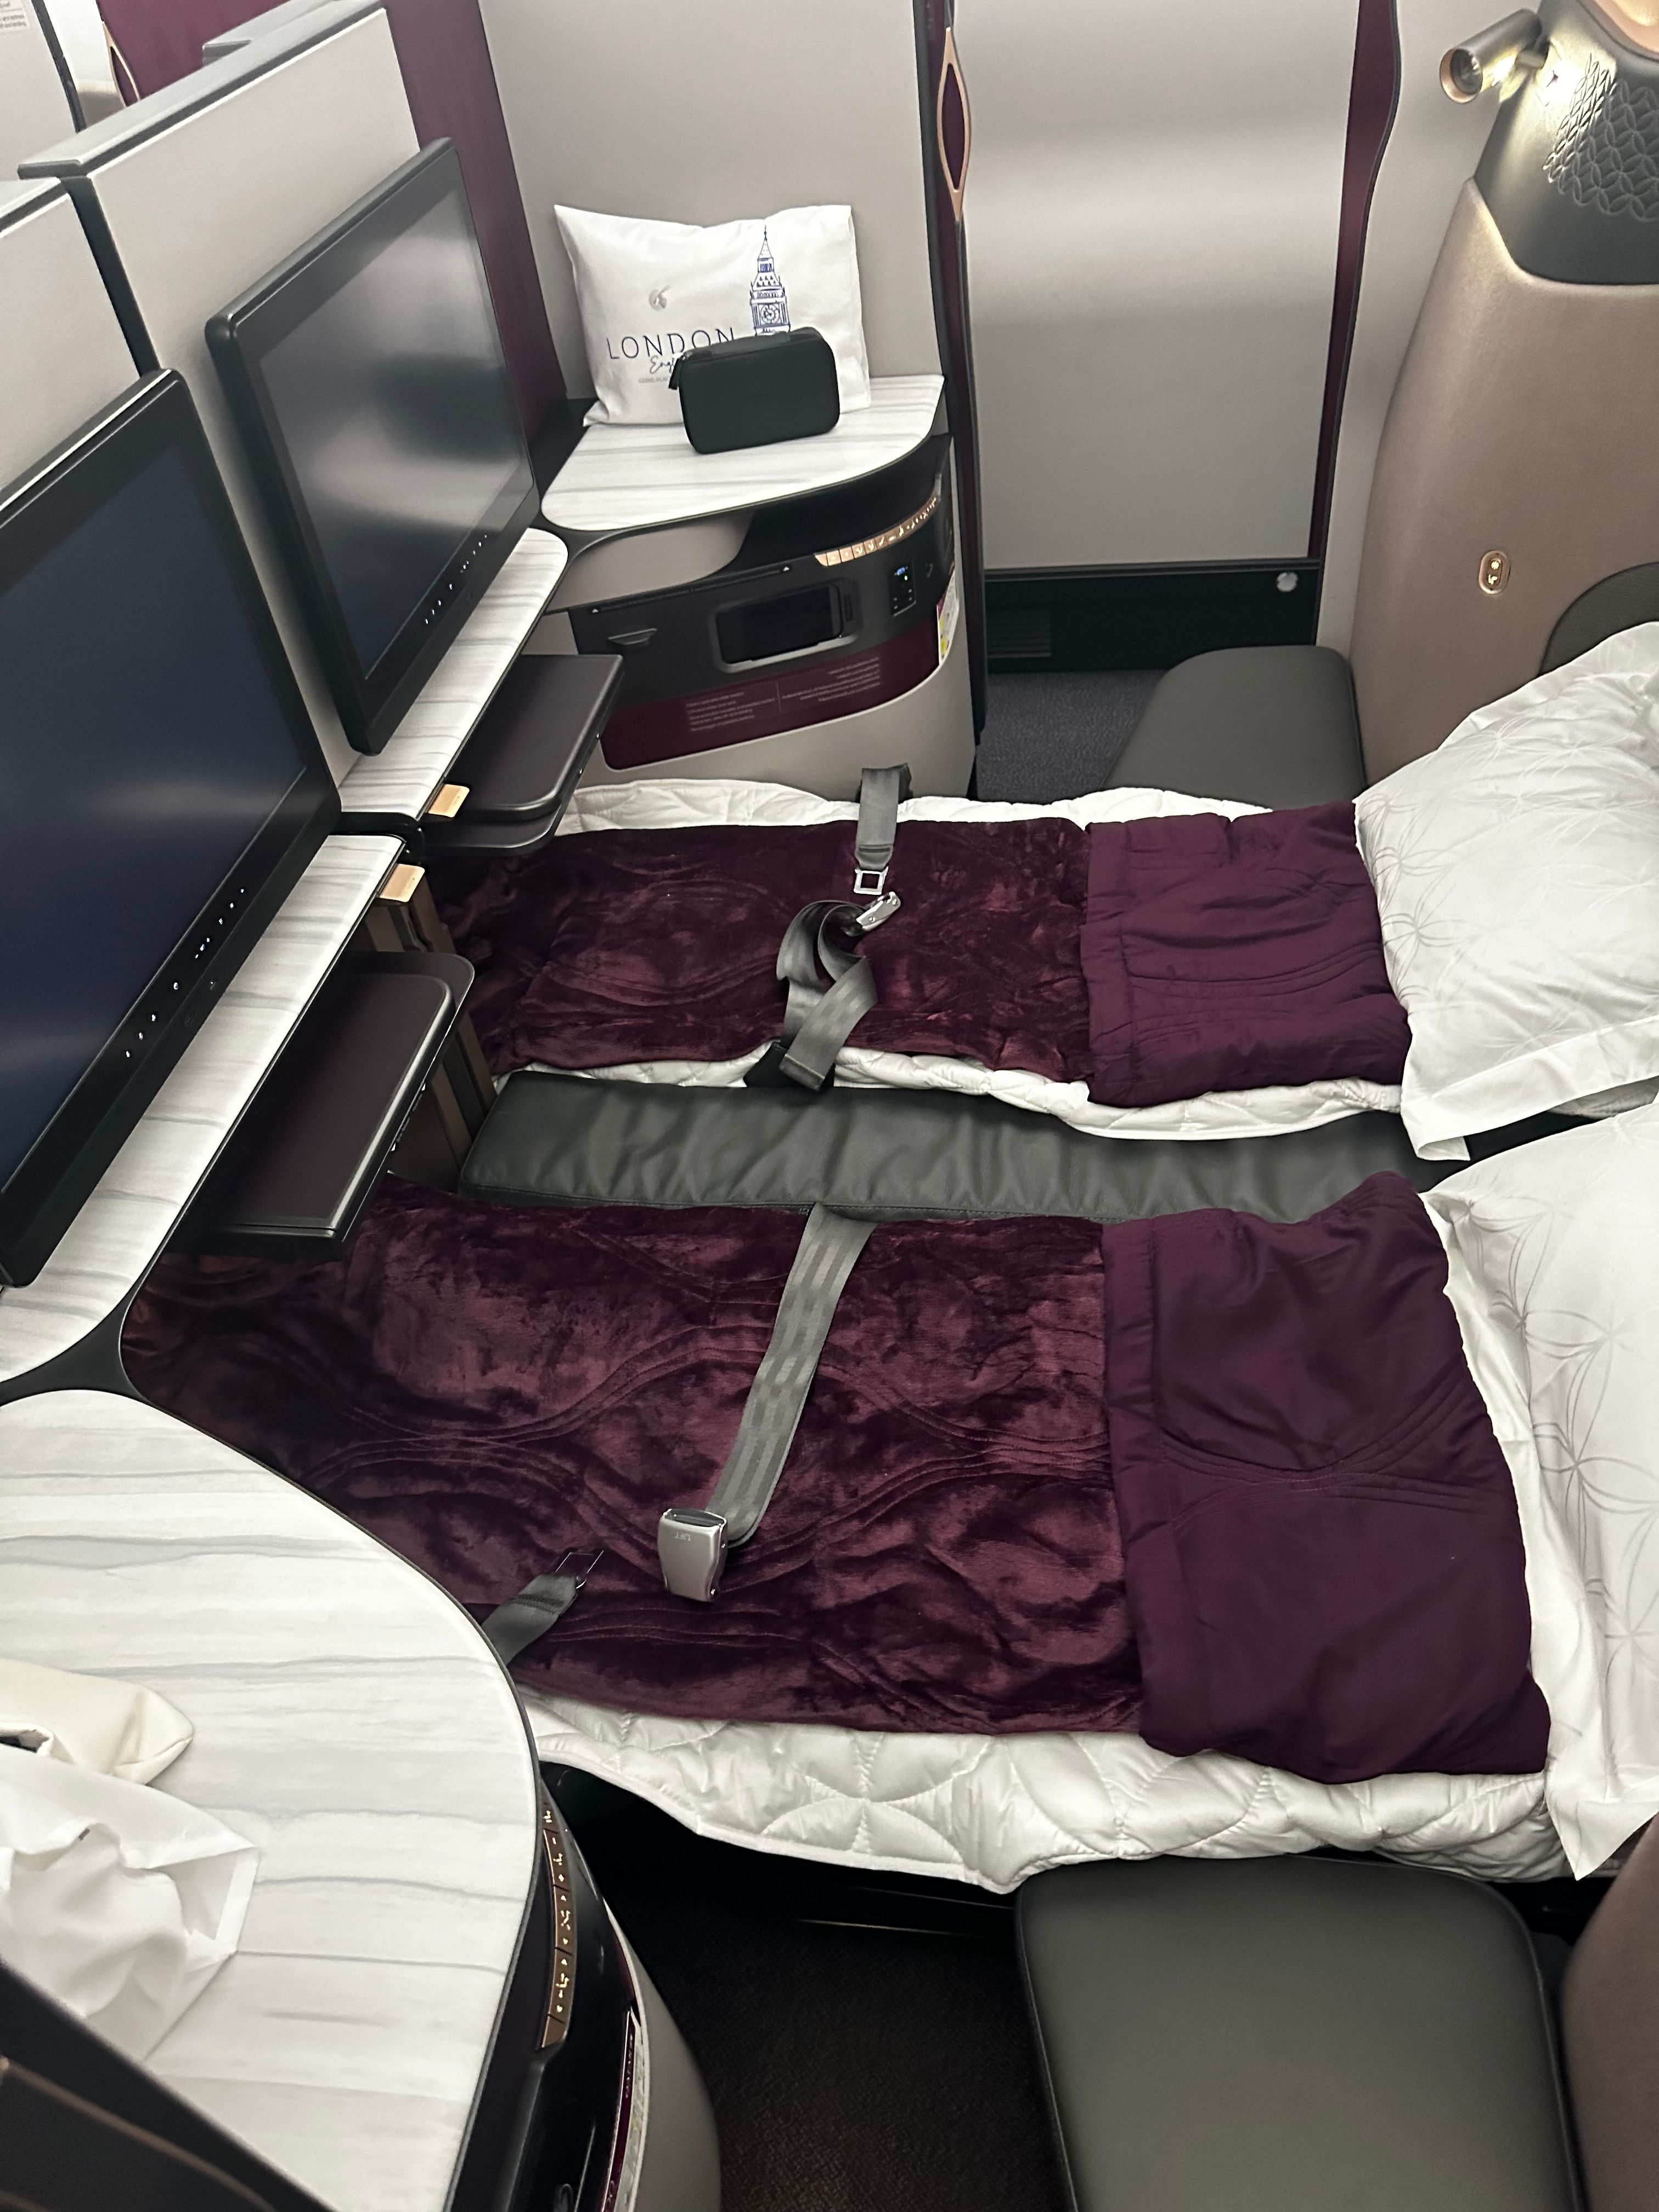 5 Incredible Features Of The Qatar Airways Qsuite